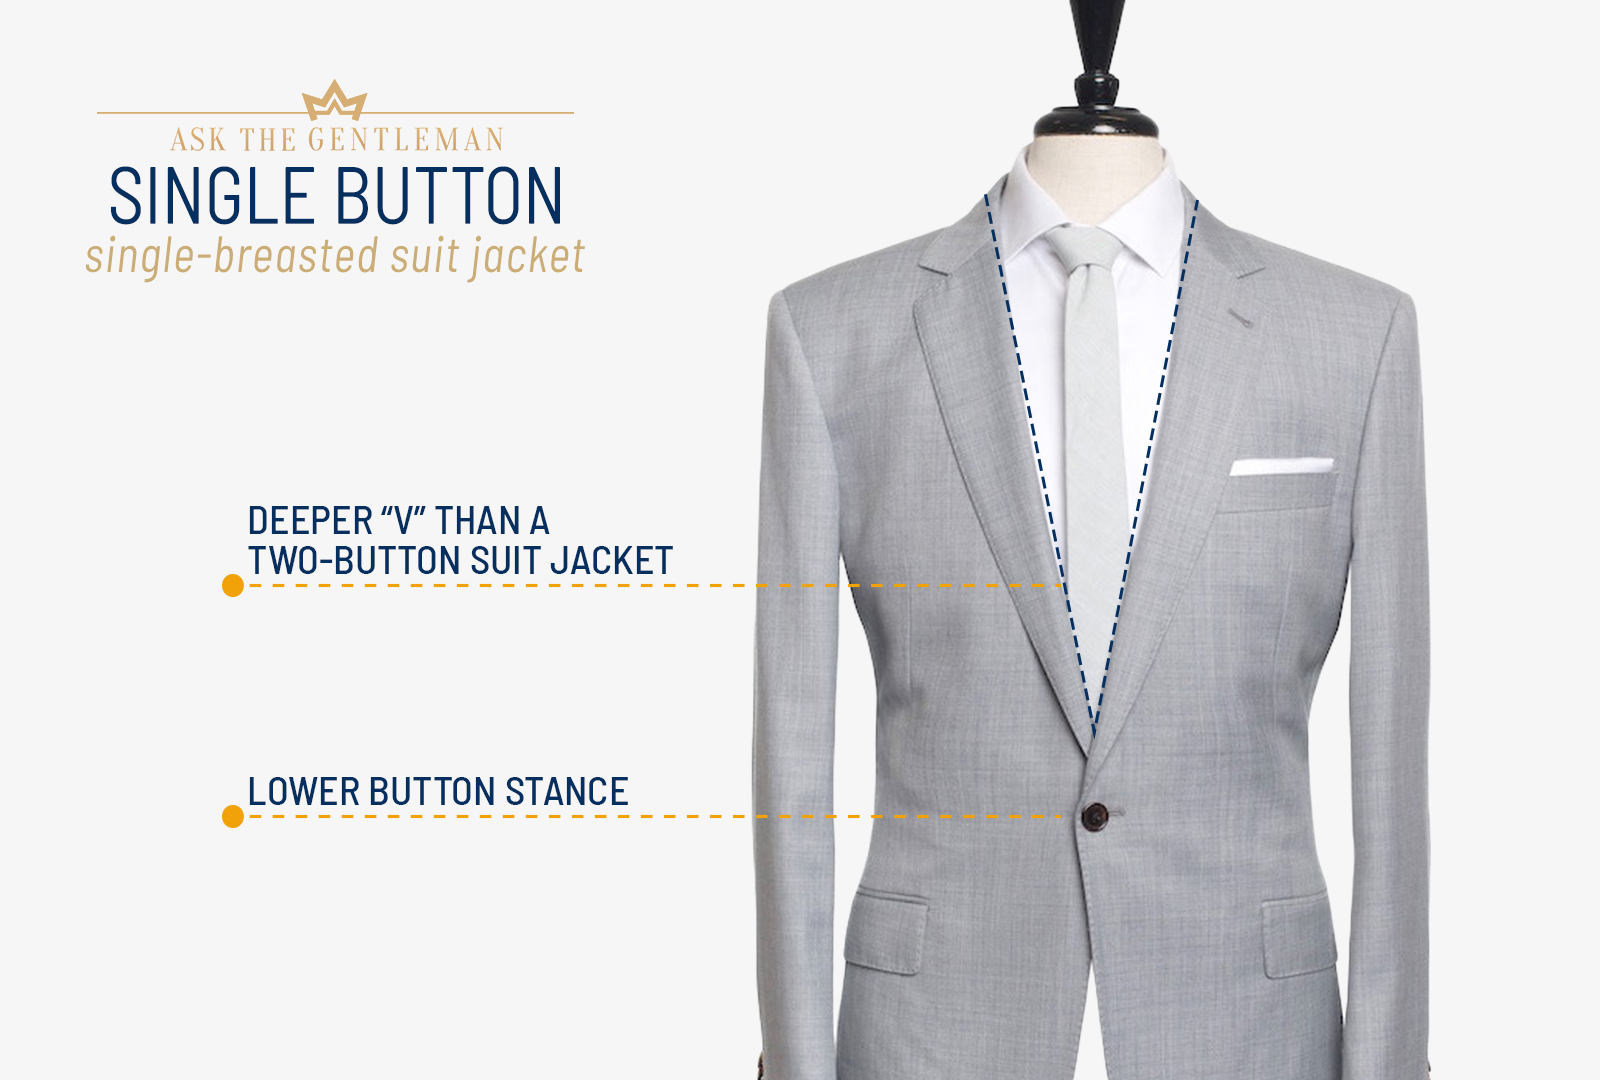 One button single-breasted suit jacket style